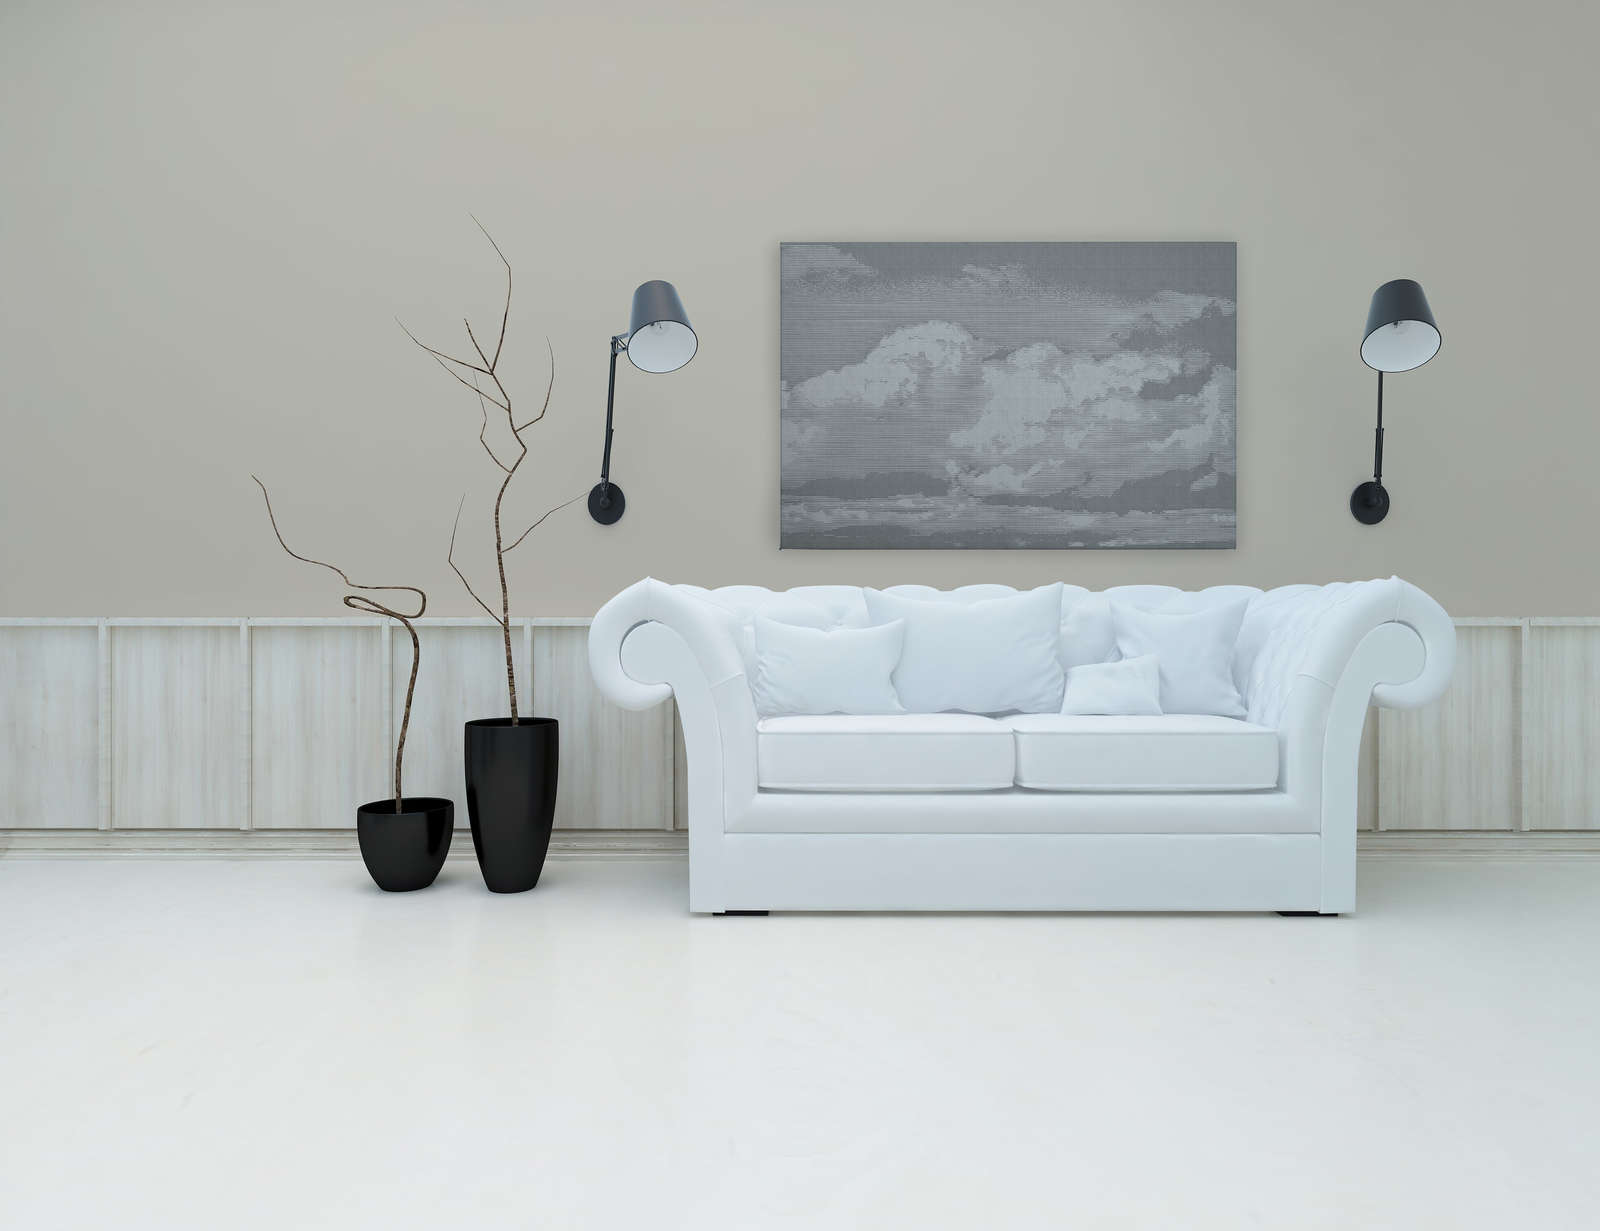             Clouds 2 - Heavenly canvas picture in natural linen look with cloud motif - 1.20 m x 0.80 m
        